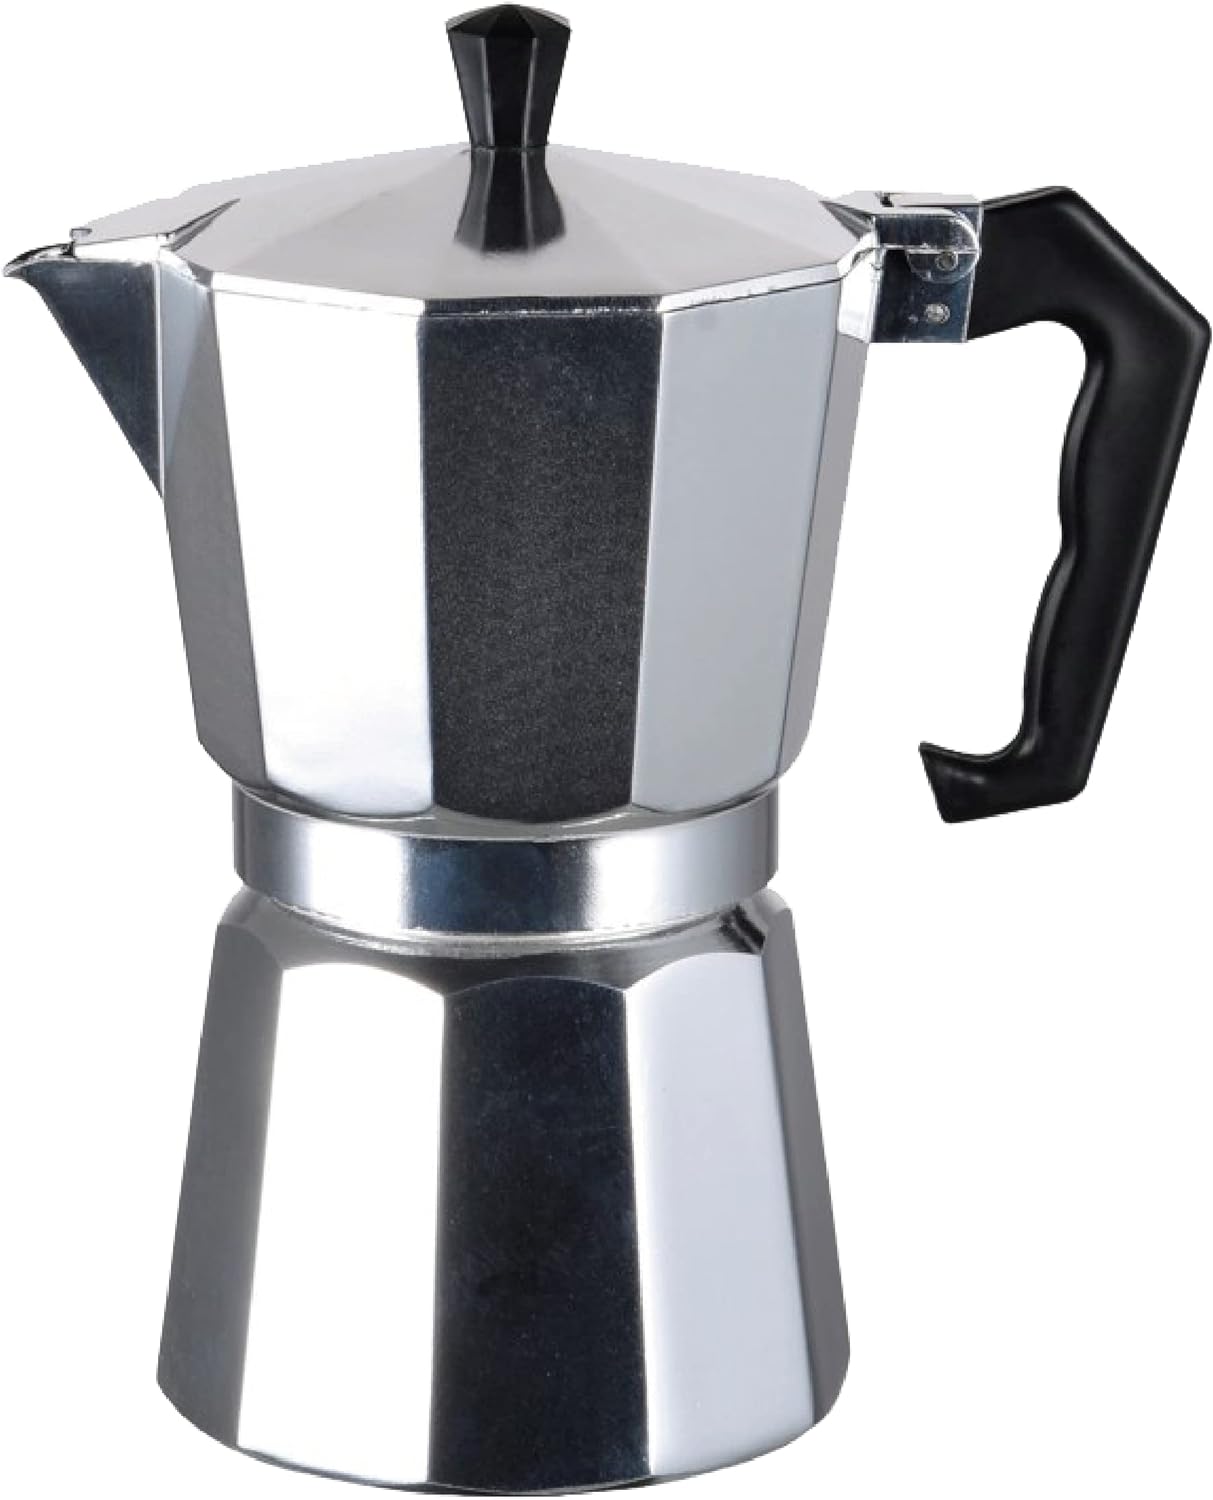 JV TEXTILES Stovetop Espresso and Coffee Maker, Moka Pot for Classic Italian and Cuban Café Brewing, Cafeteria, (6-Cup)